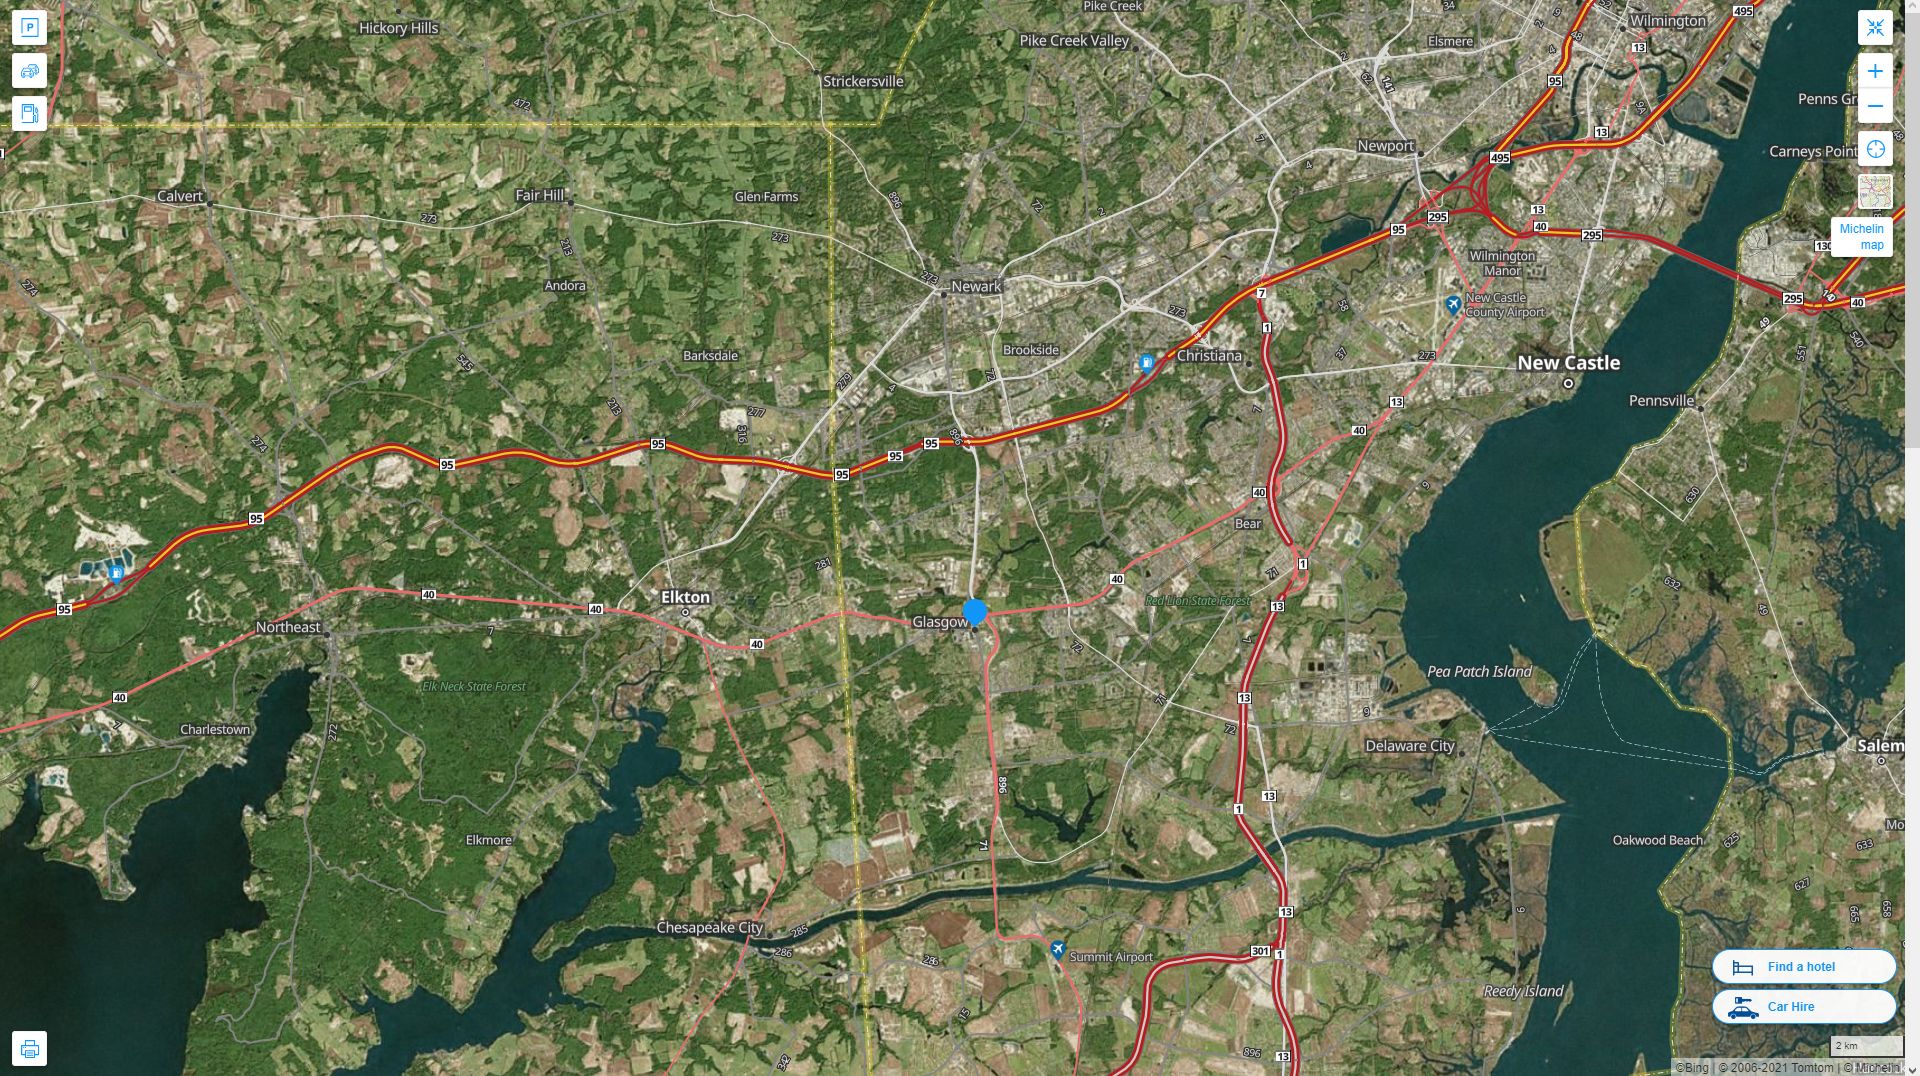 Glasgow Delaware Highway and Road Map with Satellite View